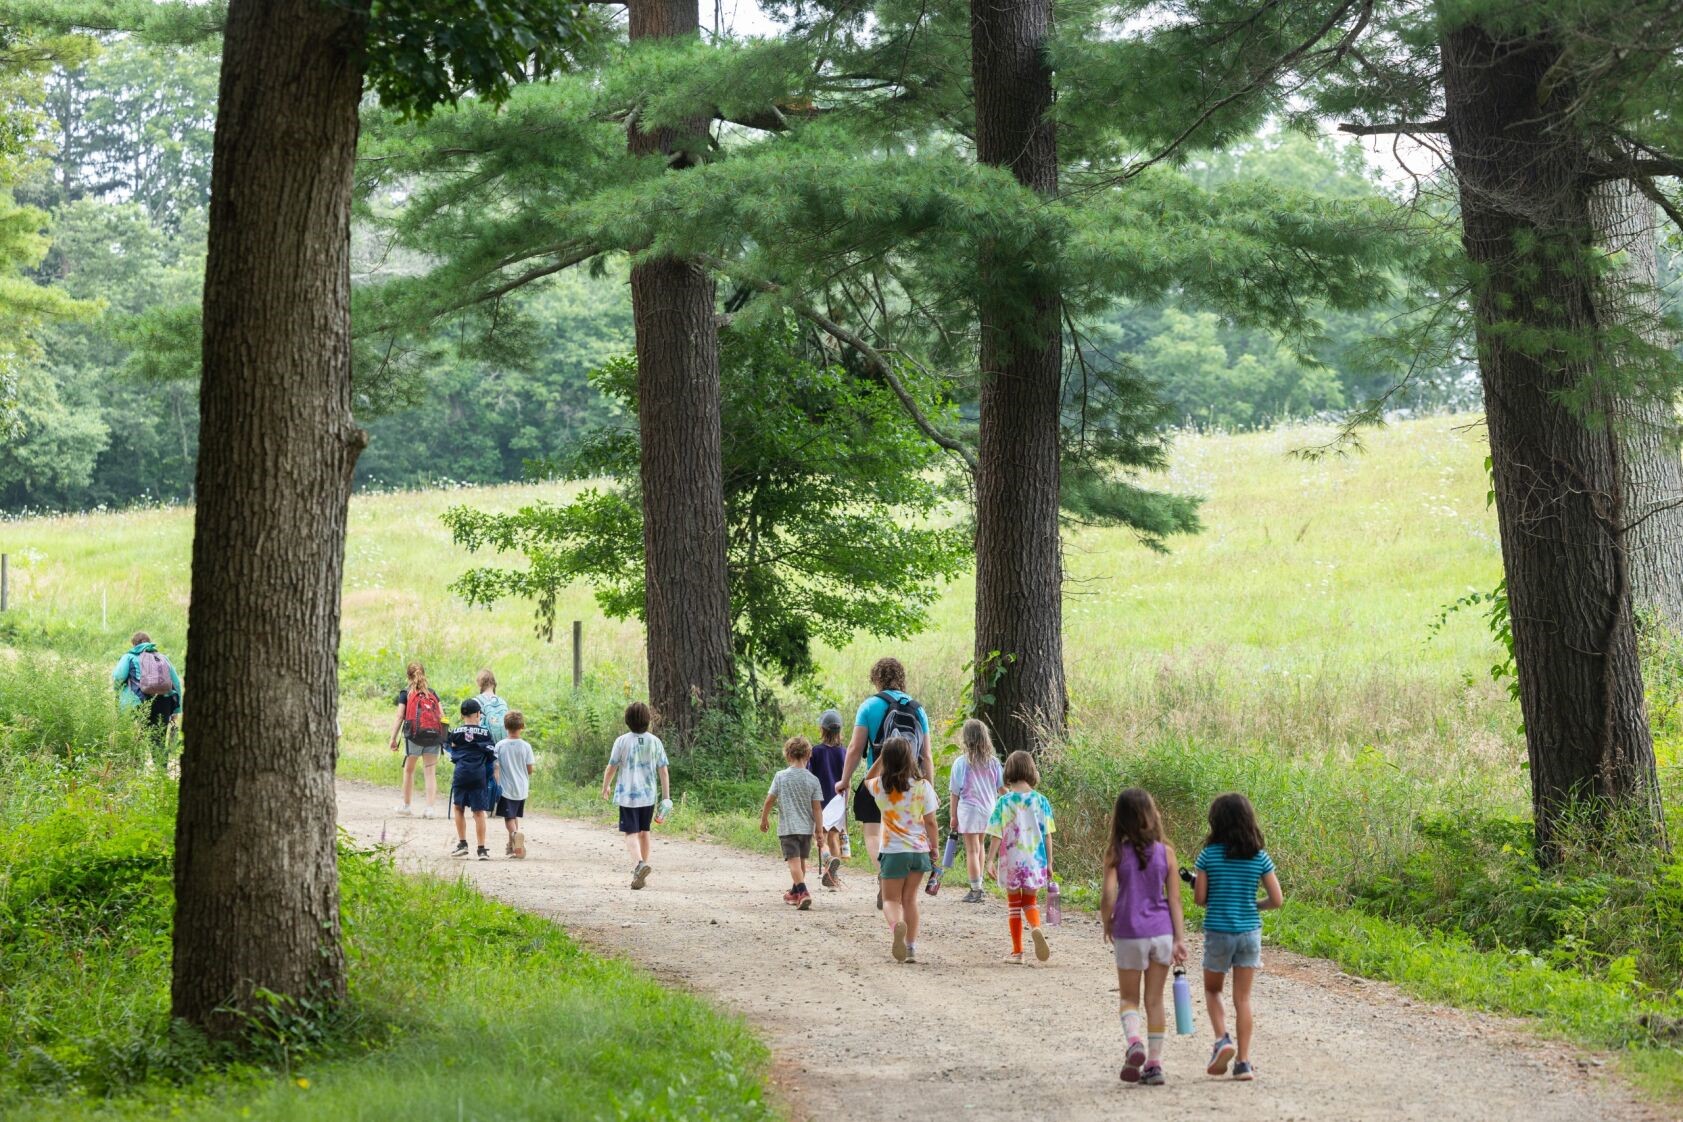 Campers walking down the path at Appleton Farms